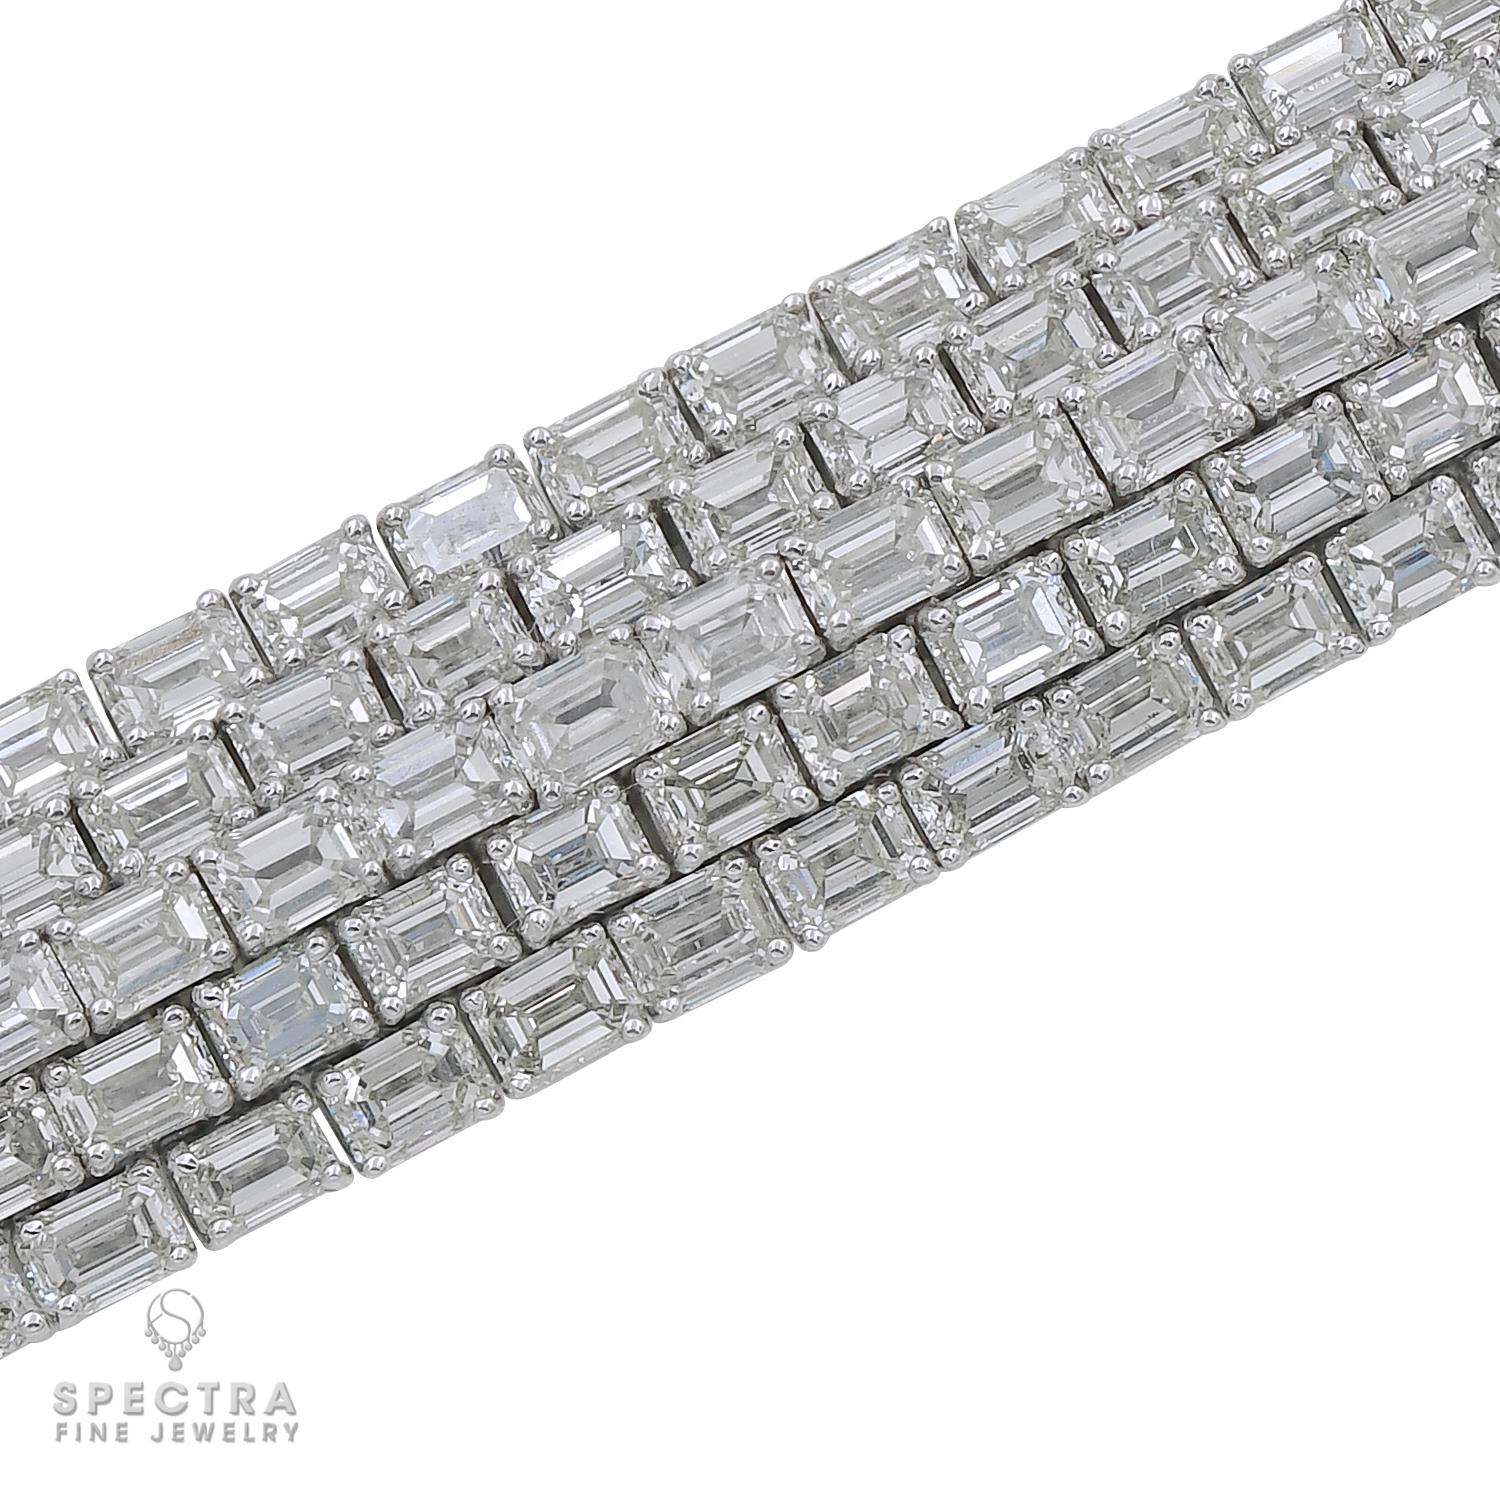 A classy bracelet comprising of 5 rows of emerald-cut diamonds set in 18k white gold.
215 diamonds weighing a total of 40.40 carats, with E-F-G color, VS clarity.
Each diamond is 0.19 carat.
All diamonds are natural, not certified. Appraisal